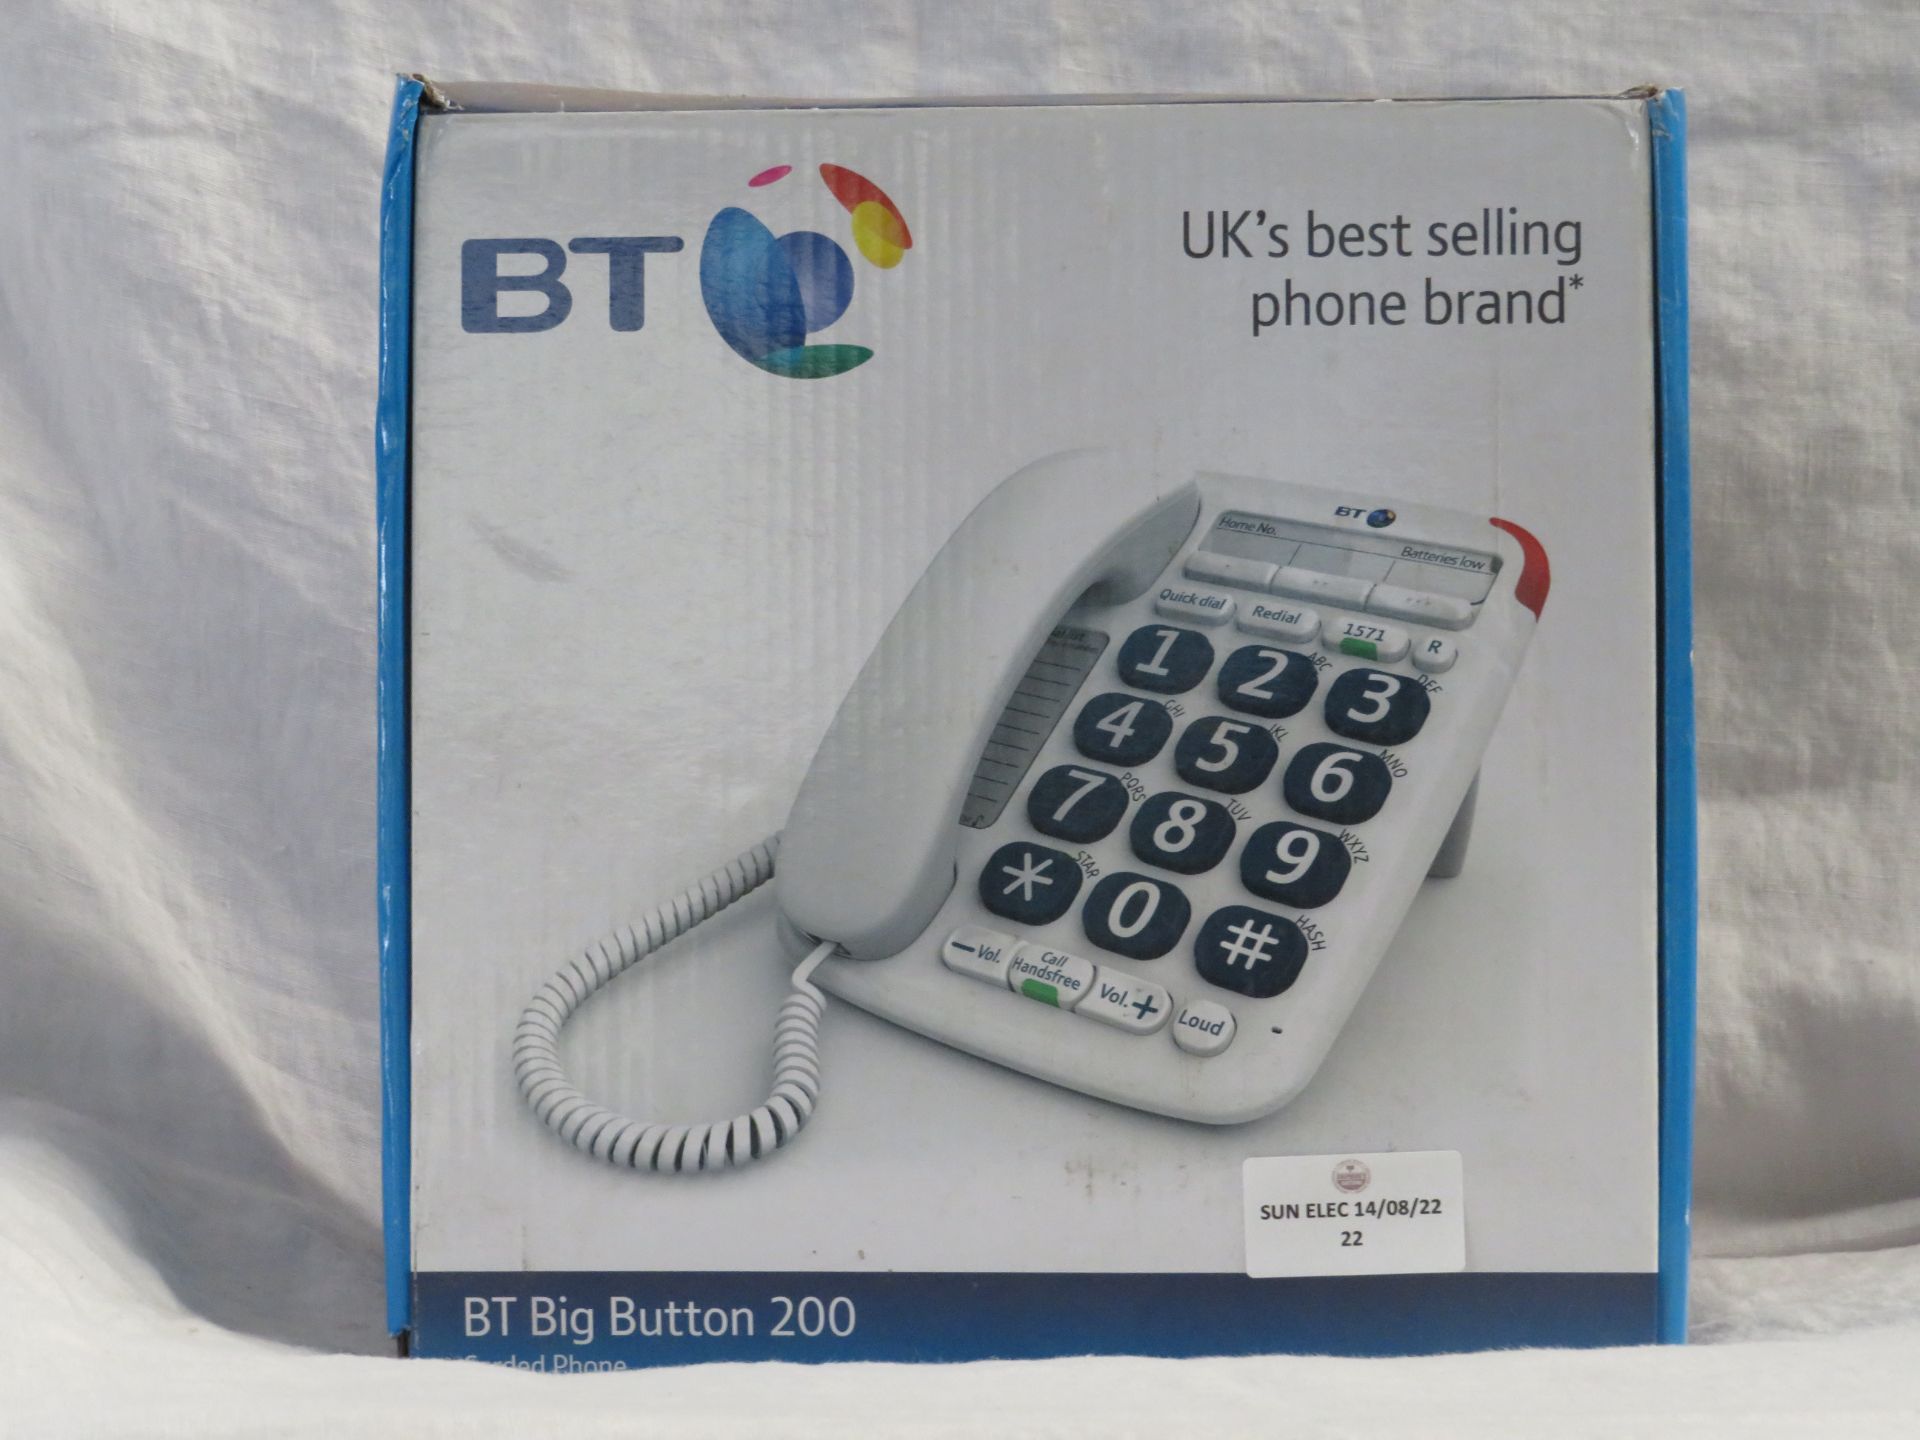 BT Big Button 200 corded phone, untested and boxed.